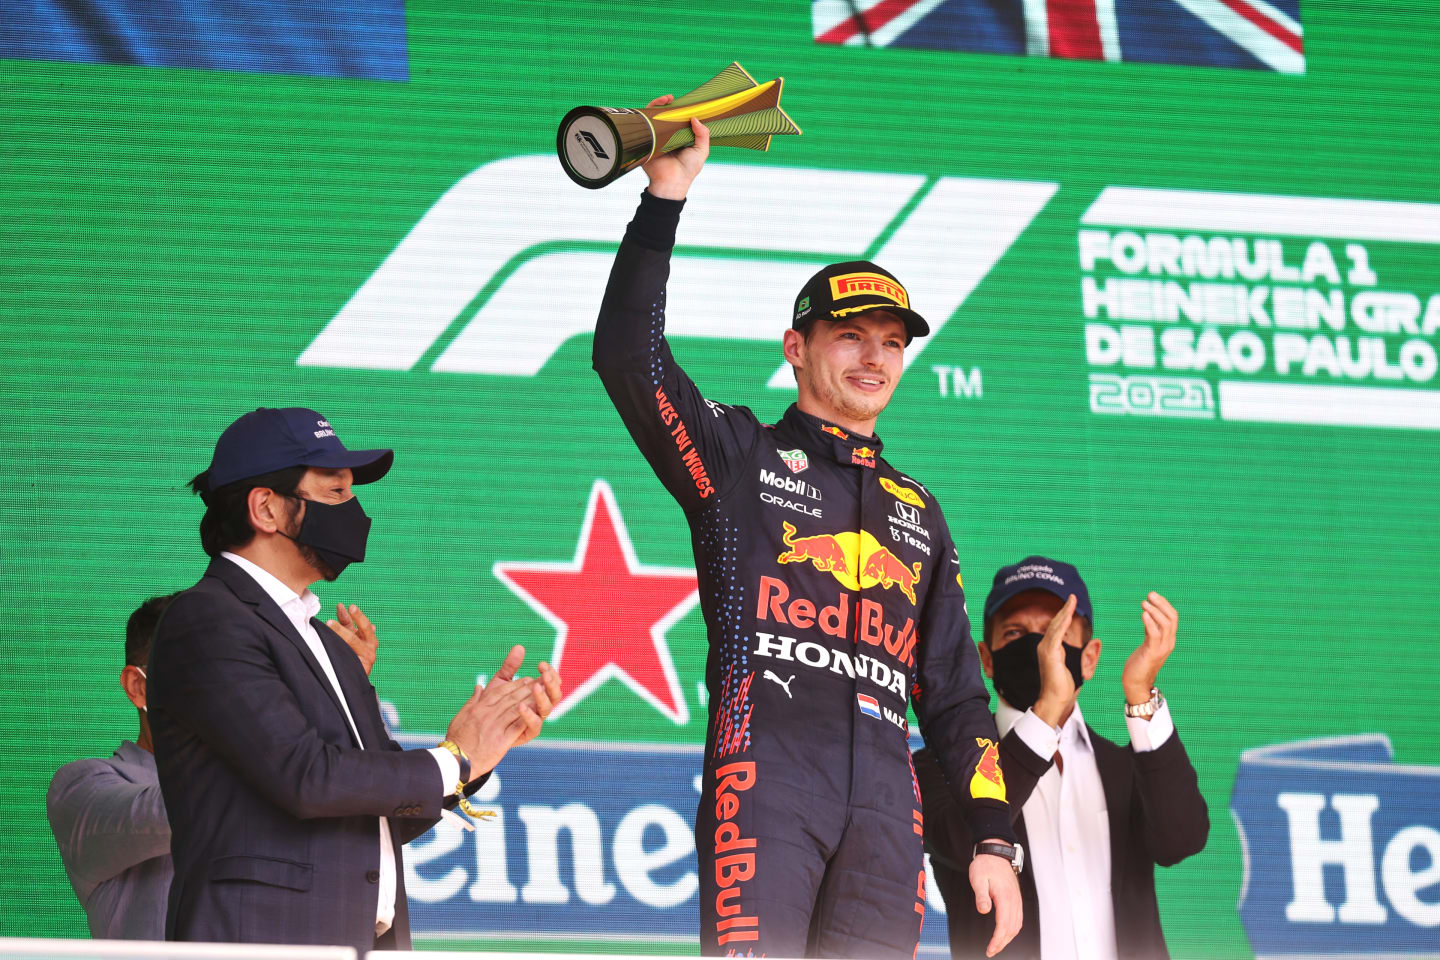 SAO PAULO, BRAZIL - NOVEMBER 14: Second placed Max Verstappen of Netherlands and Red Bull Racing celebrates on the podium during the F1 Grand Prix of Brazil at Autodromo Jose Carlos Pace on November 14, 2021 in Sao Paulo, Brazil. (Photo by Lars Baron/Getty Images)